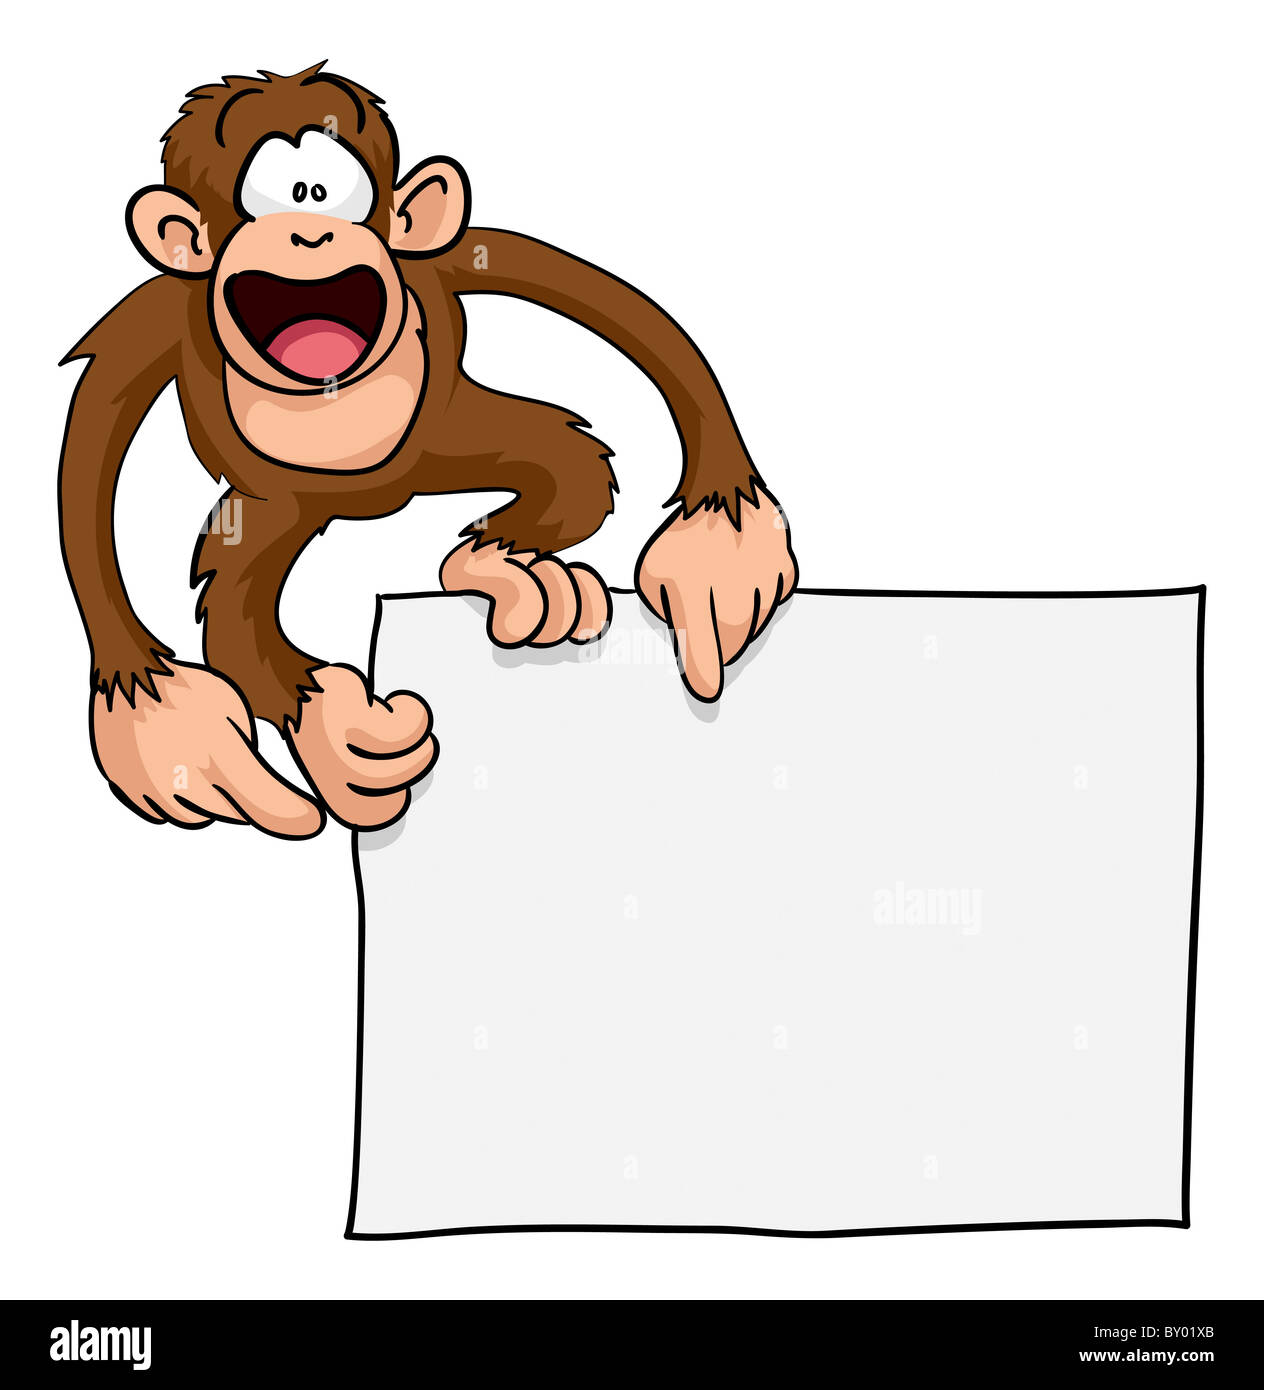 A crazy cute excited monkey pointing at a blank sign with copy-space illustration Stock Photo